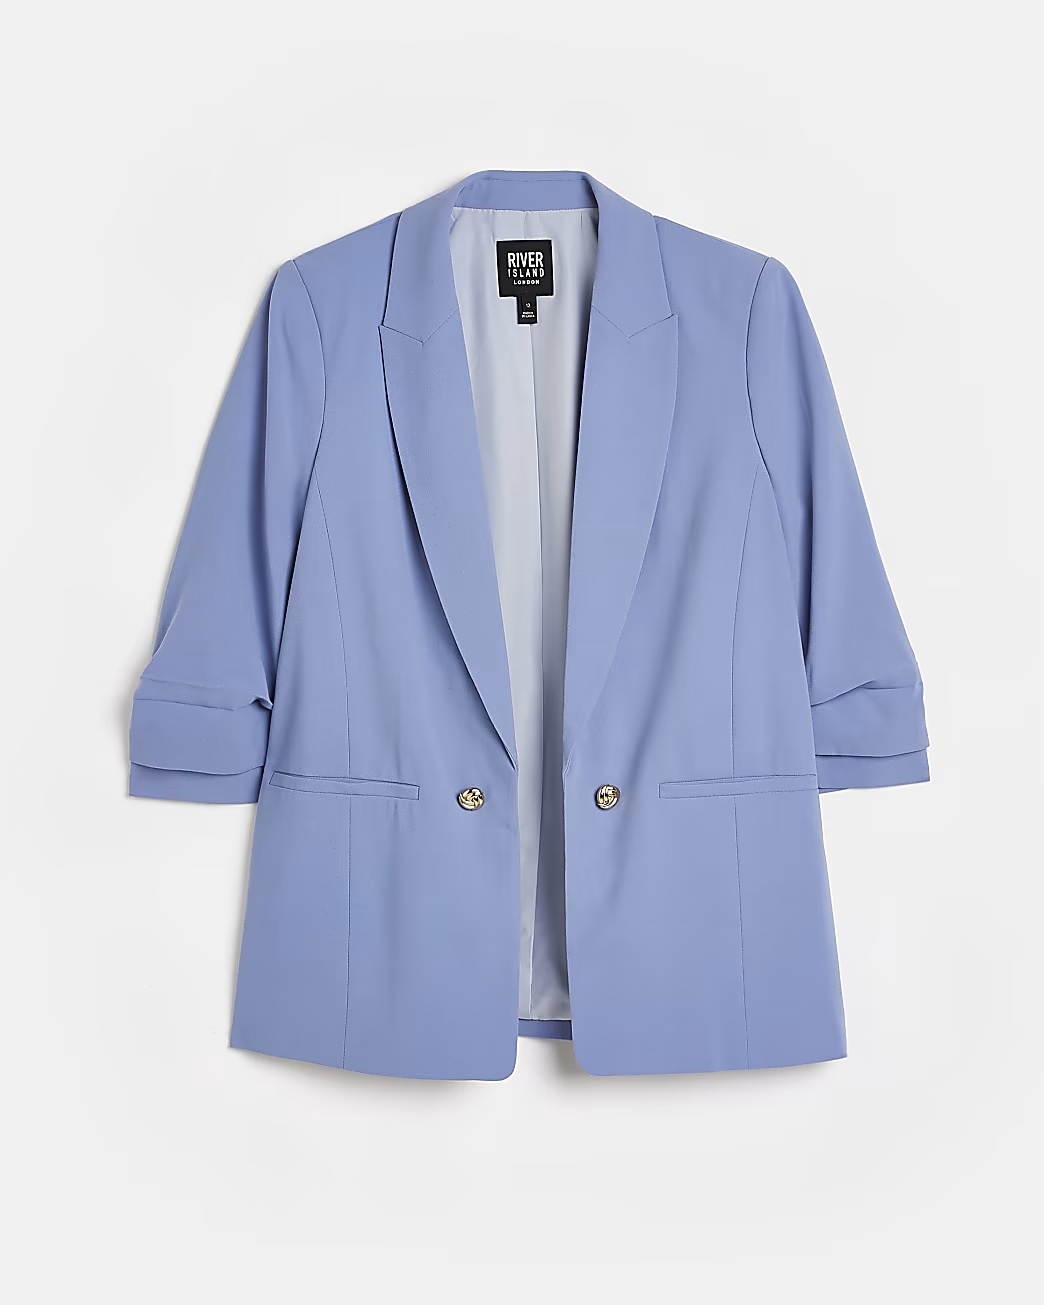 This blue blazer is just £25 at River Island